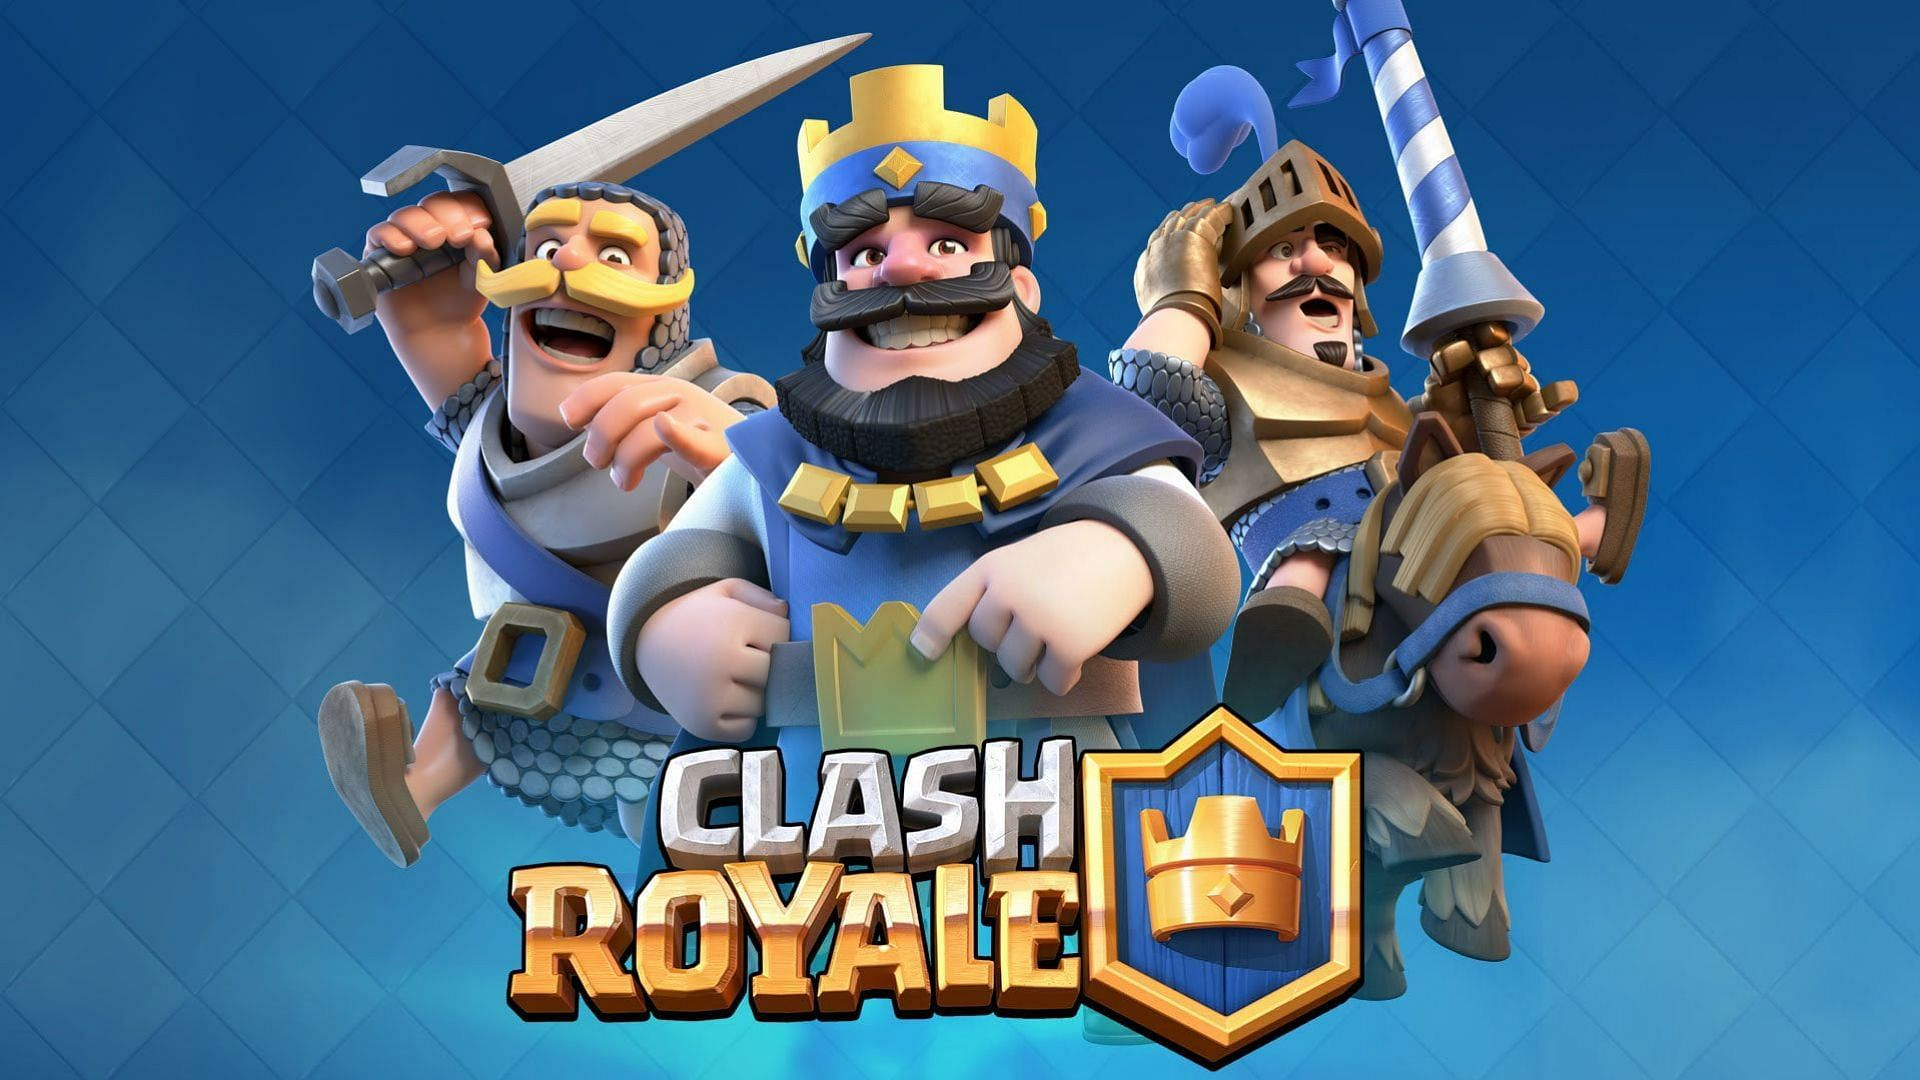 Anime names in Clash Royale